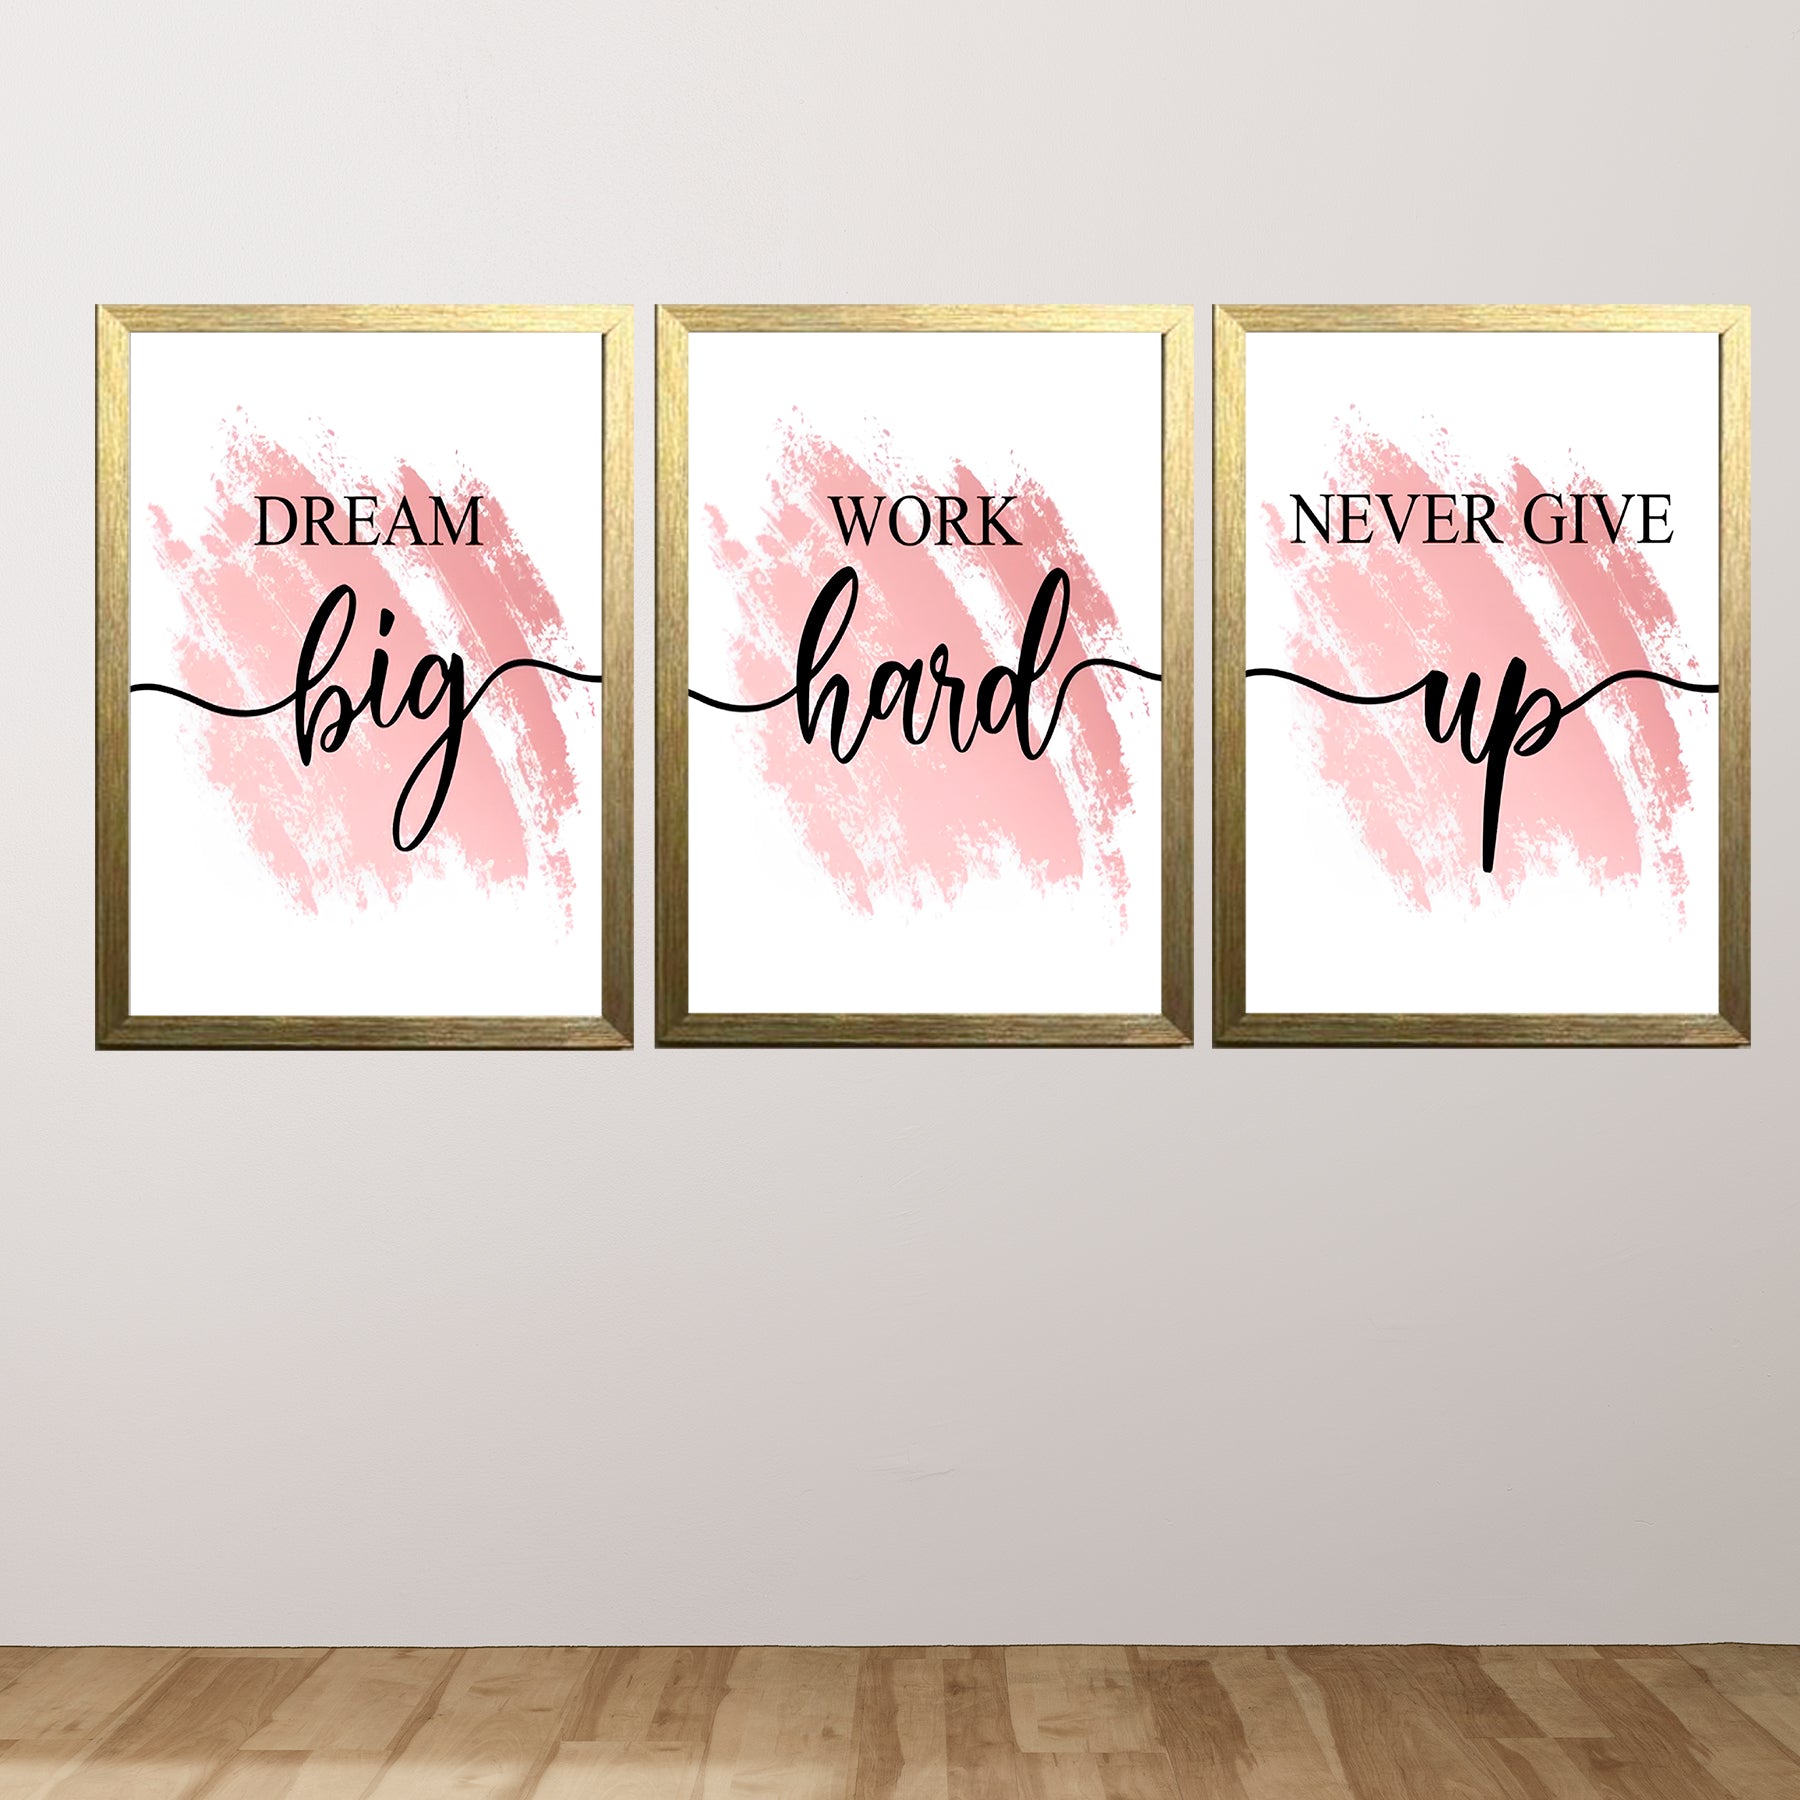 Buy golden Motivational Quotes About Success For House &amp; Office Decor Set of 3 Frames